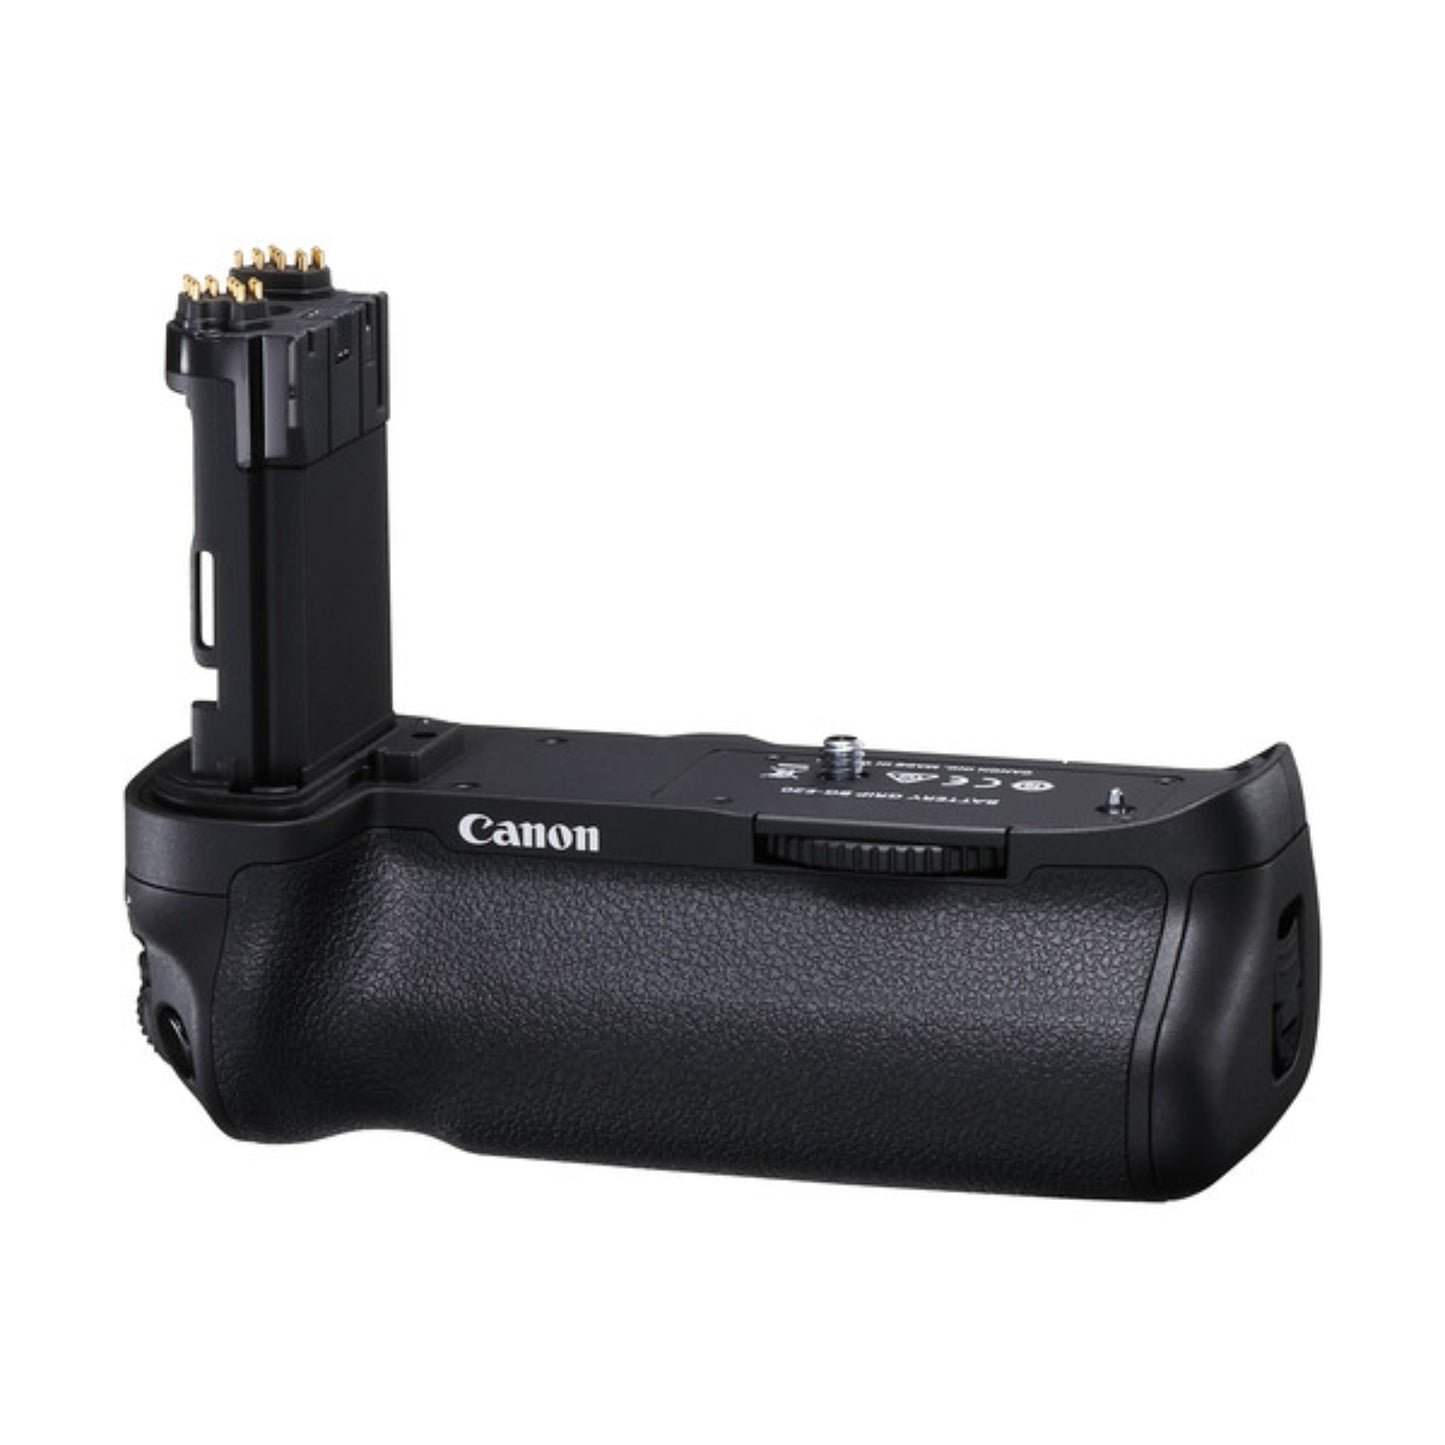 Battery grip for Canon 5d mk iv mk4 for hire Canon 90 d with 17 to 70mm lens kit for hire at Topic Rentals